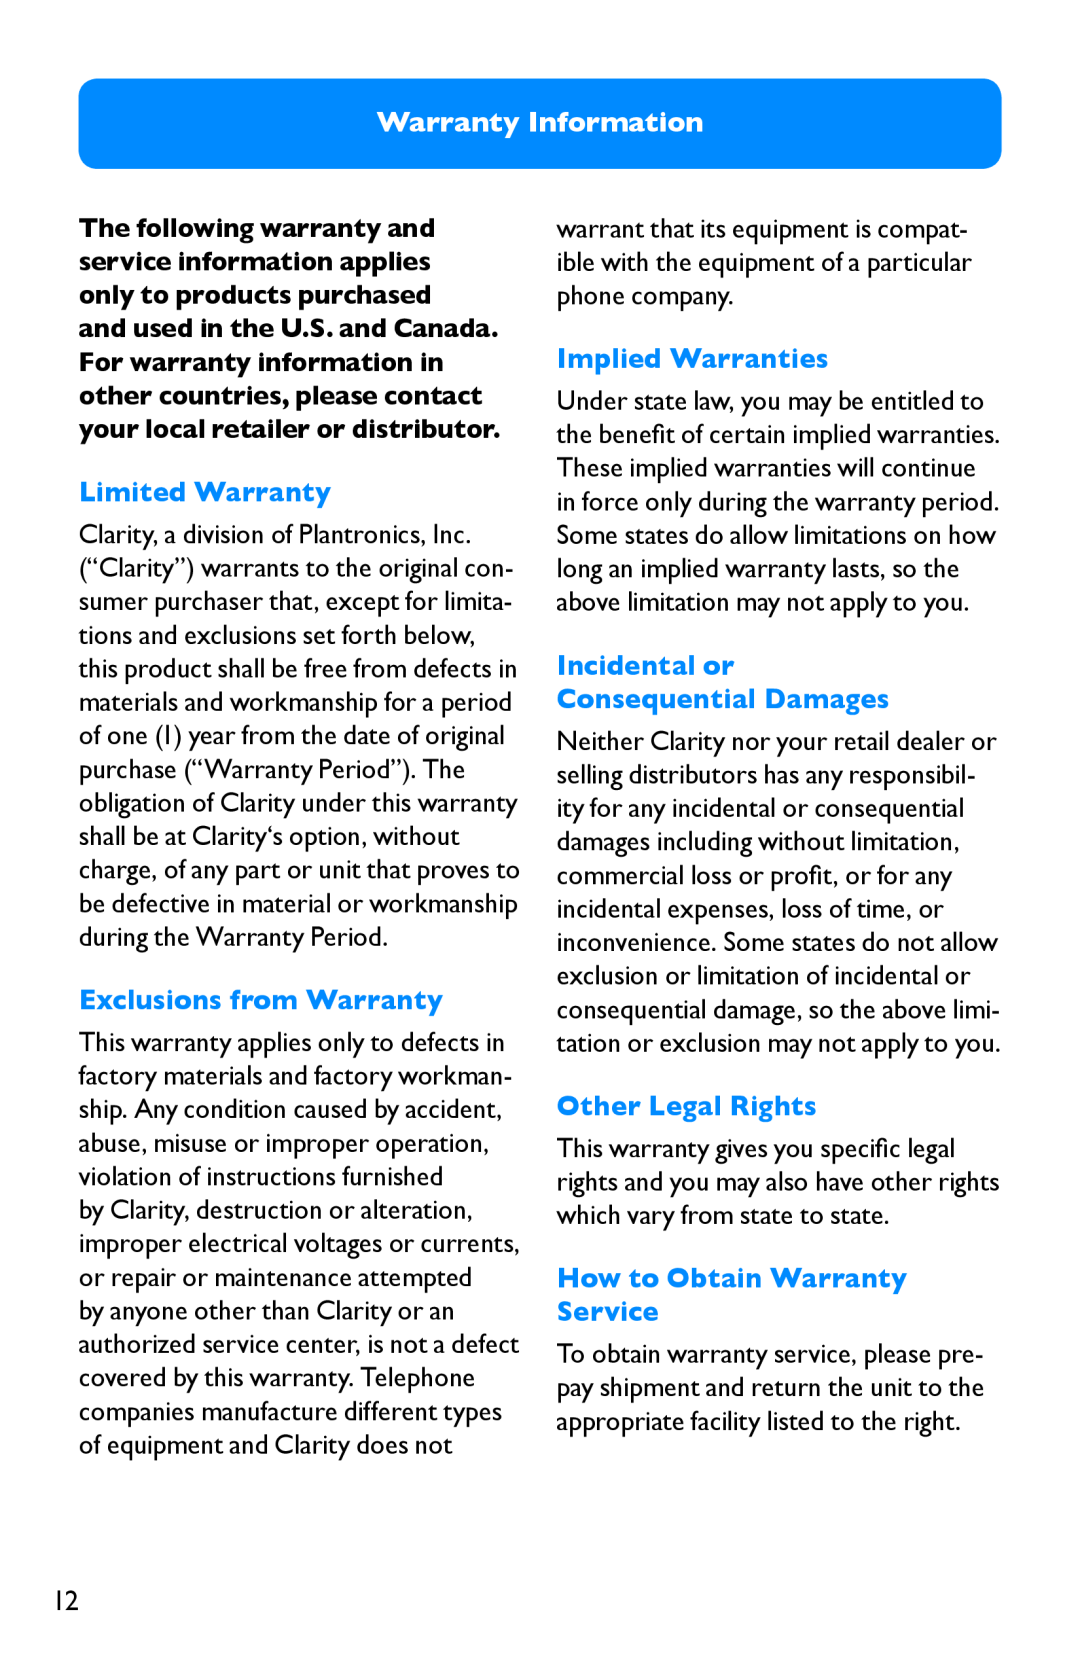 Clarity Pal manual Warranty Information, Limited Warranty, Exclusions from Warranty, Implied Warranties, Other Legal Rights 